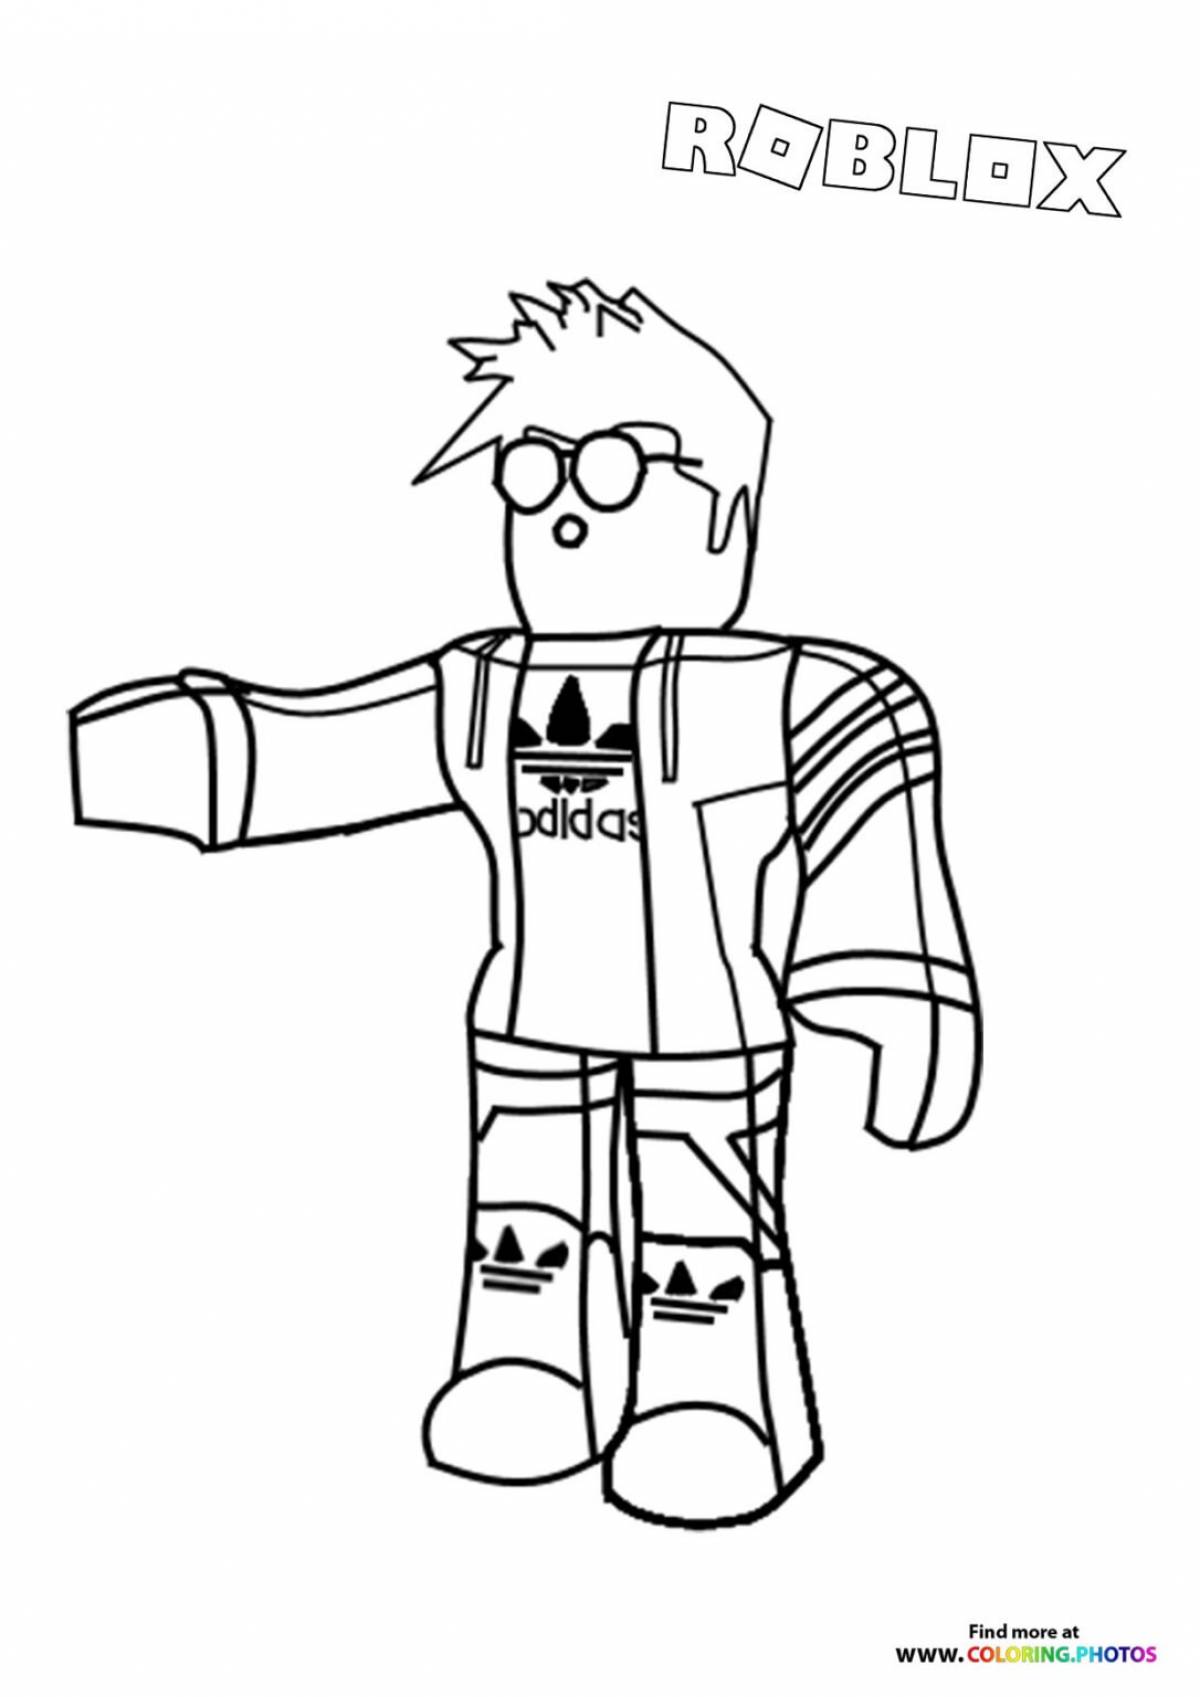 Roblox brookhaven coloring page